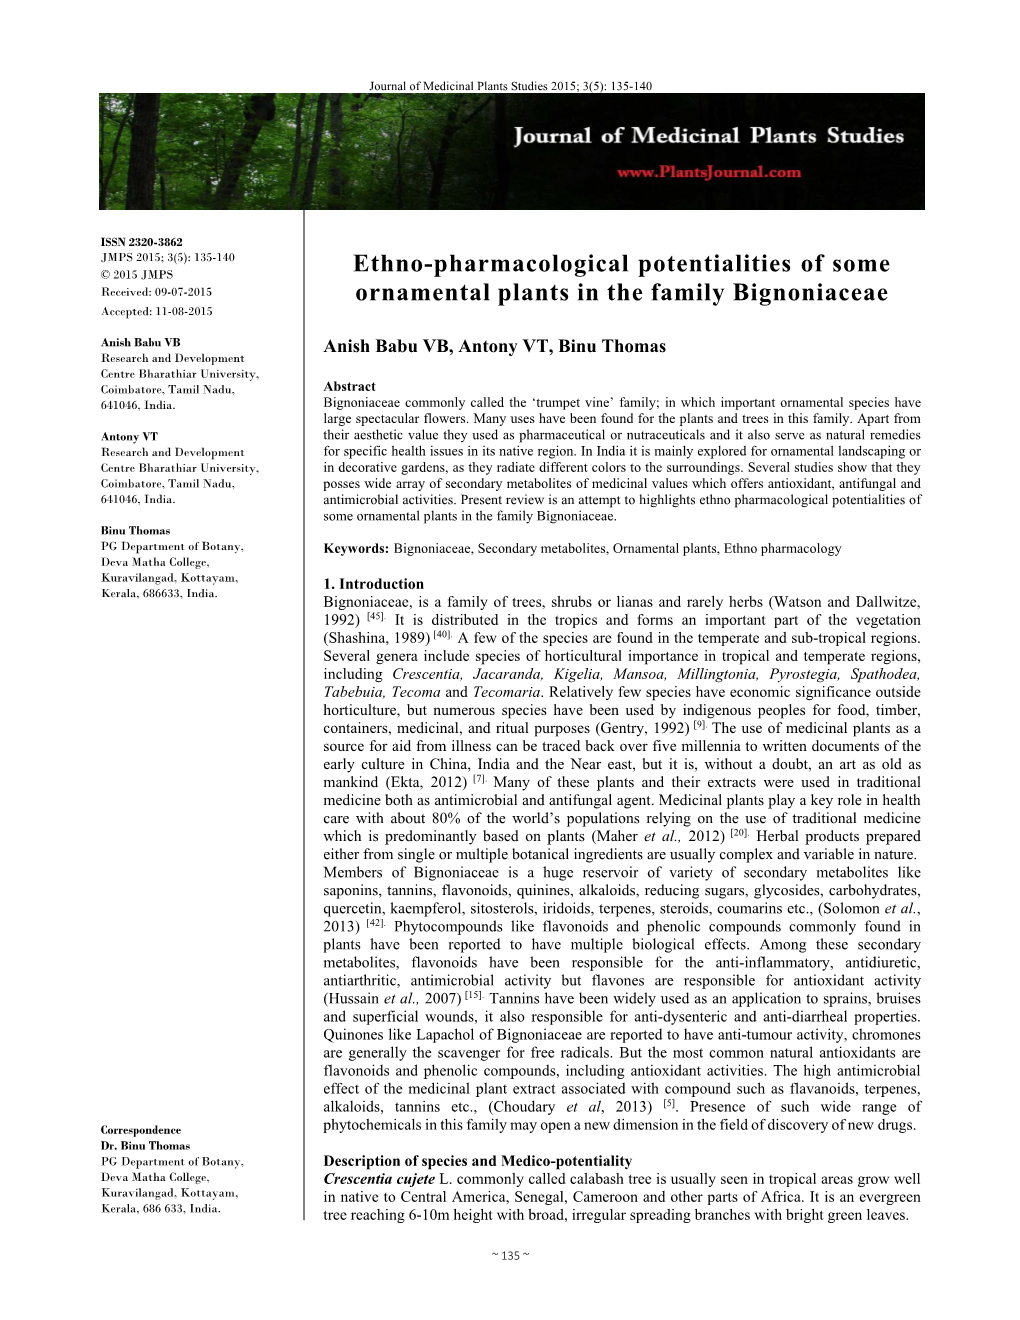 Ethno-Pharmacological Potentialities of Some Ornamental Plants in The